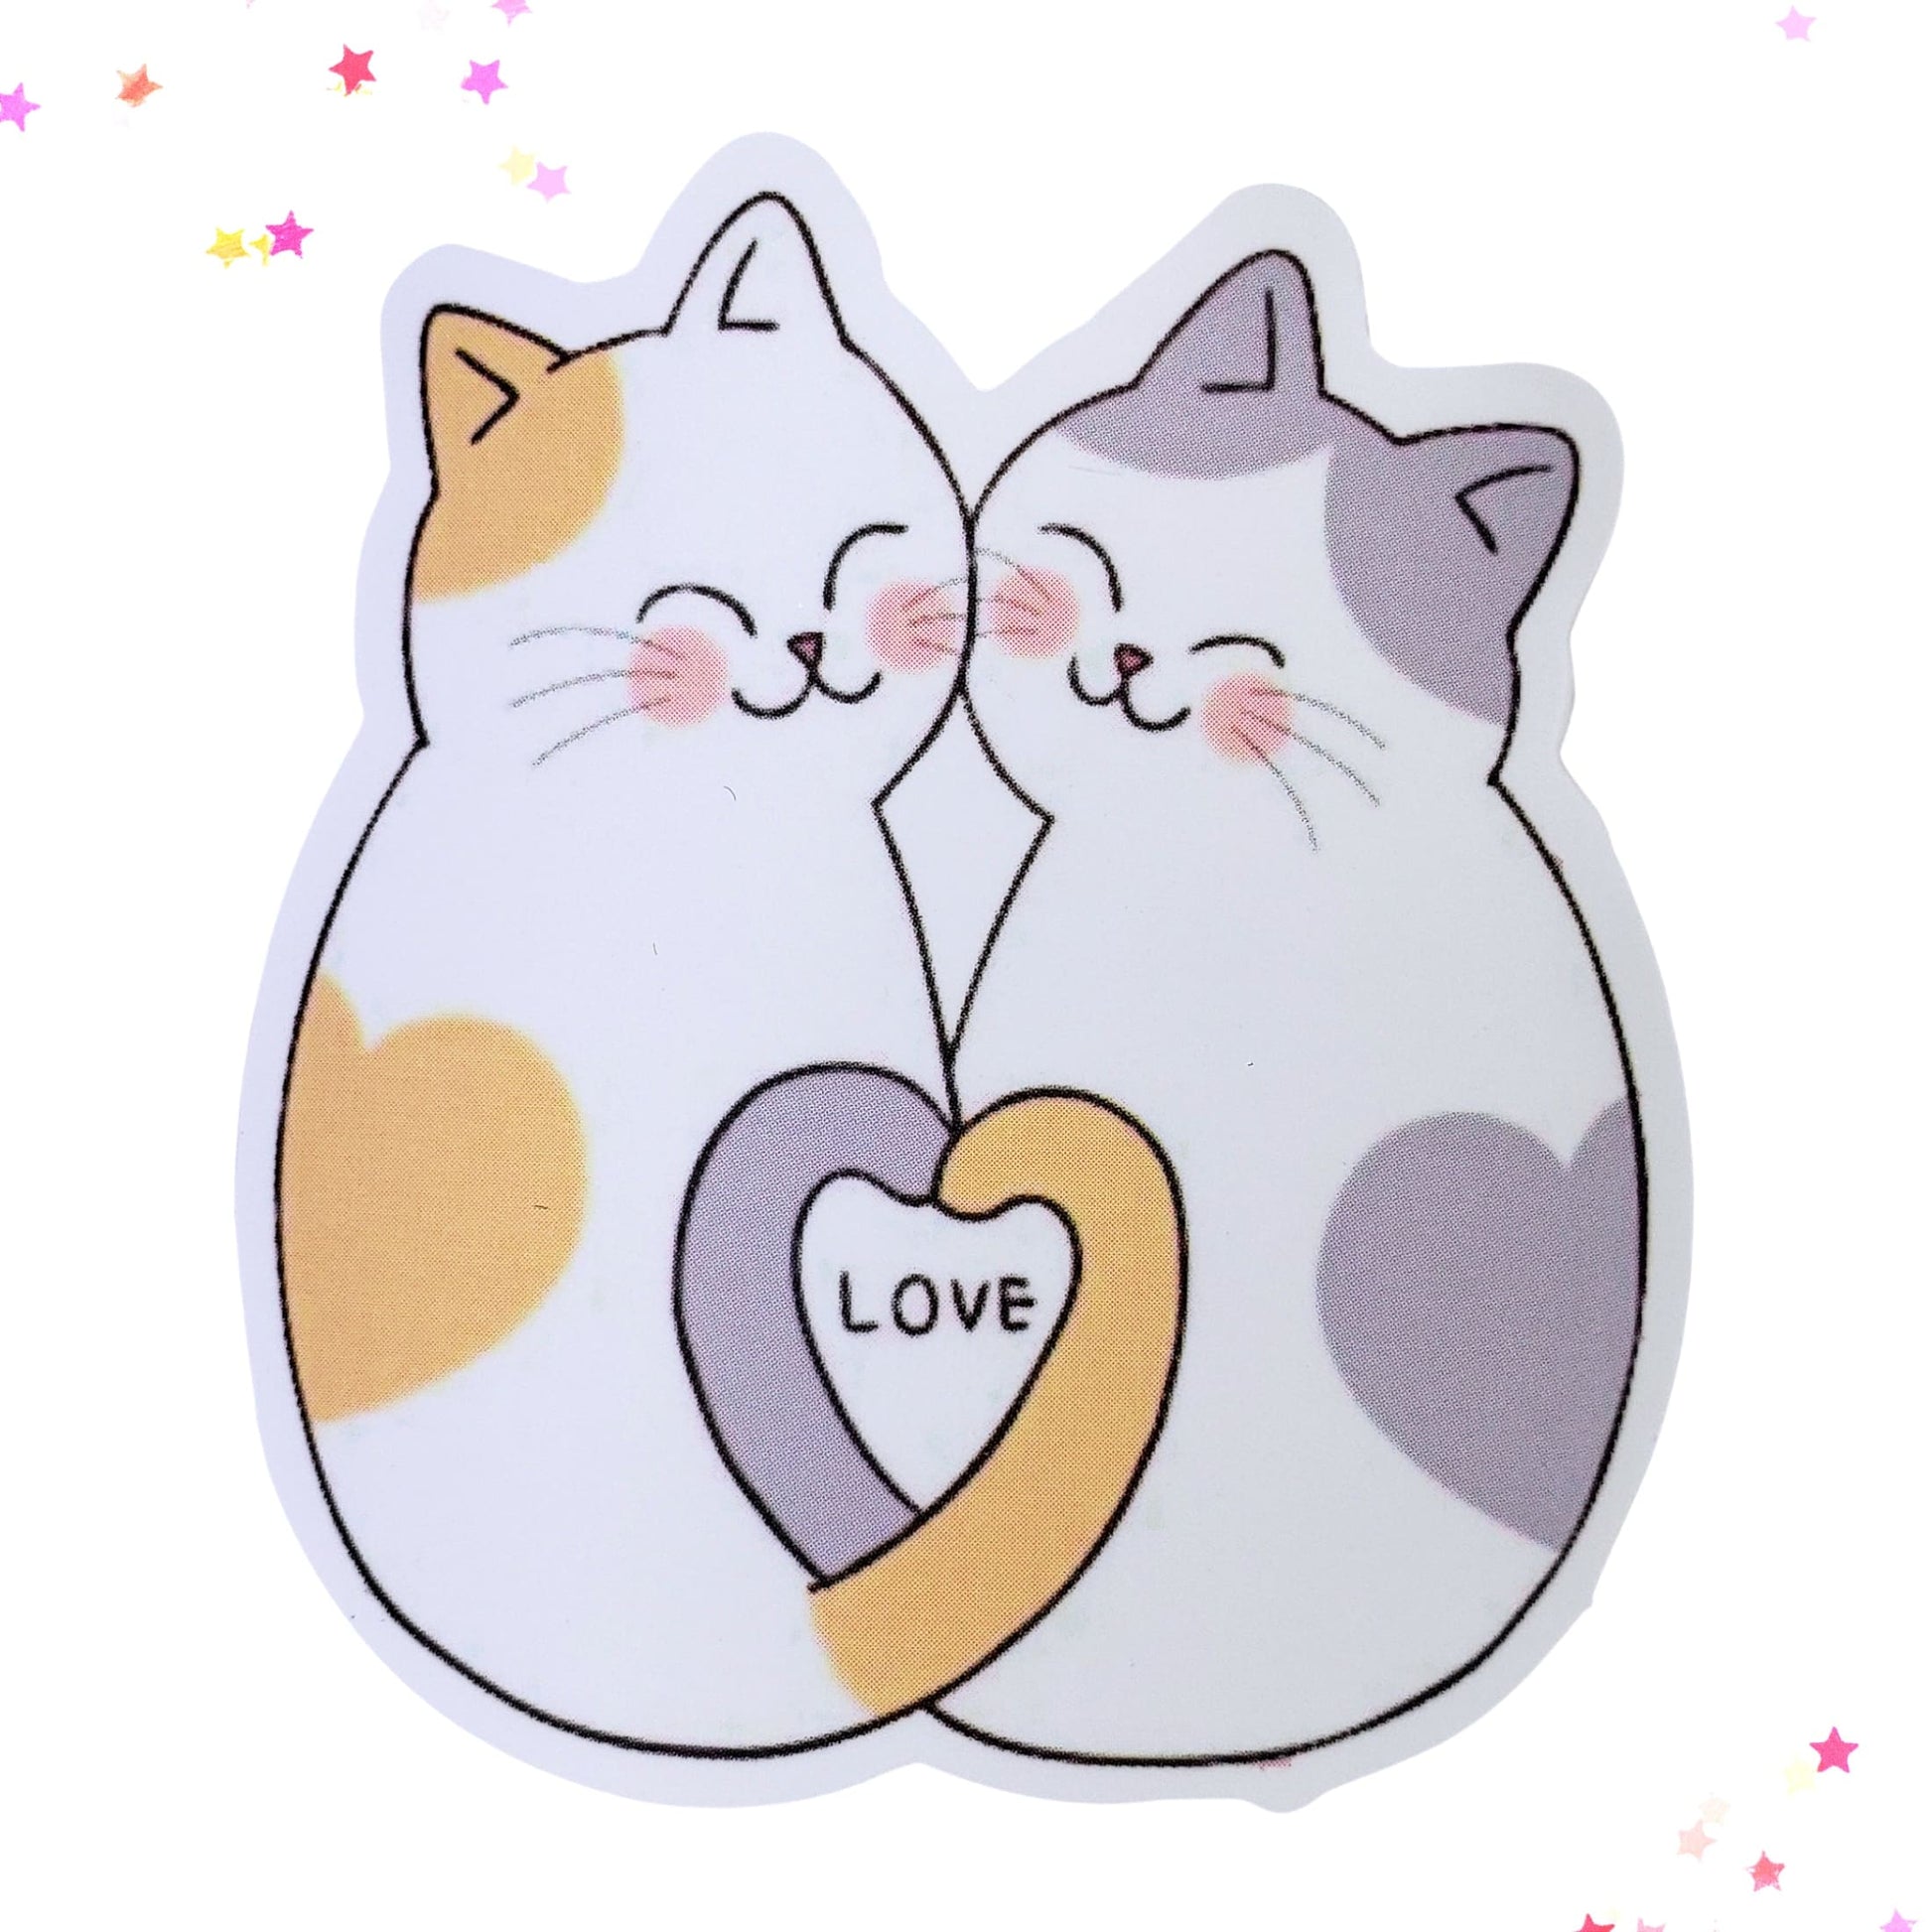 Cats in Love Waterproof Sticker from Confetti Kitty, Only 1.00